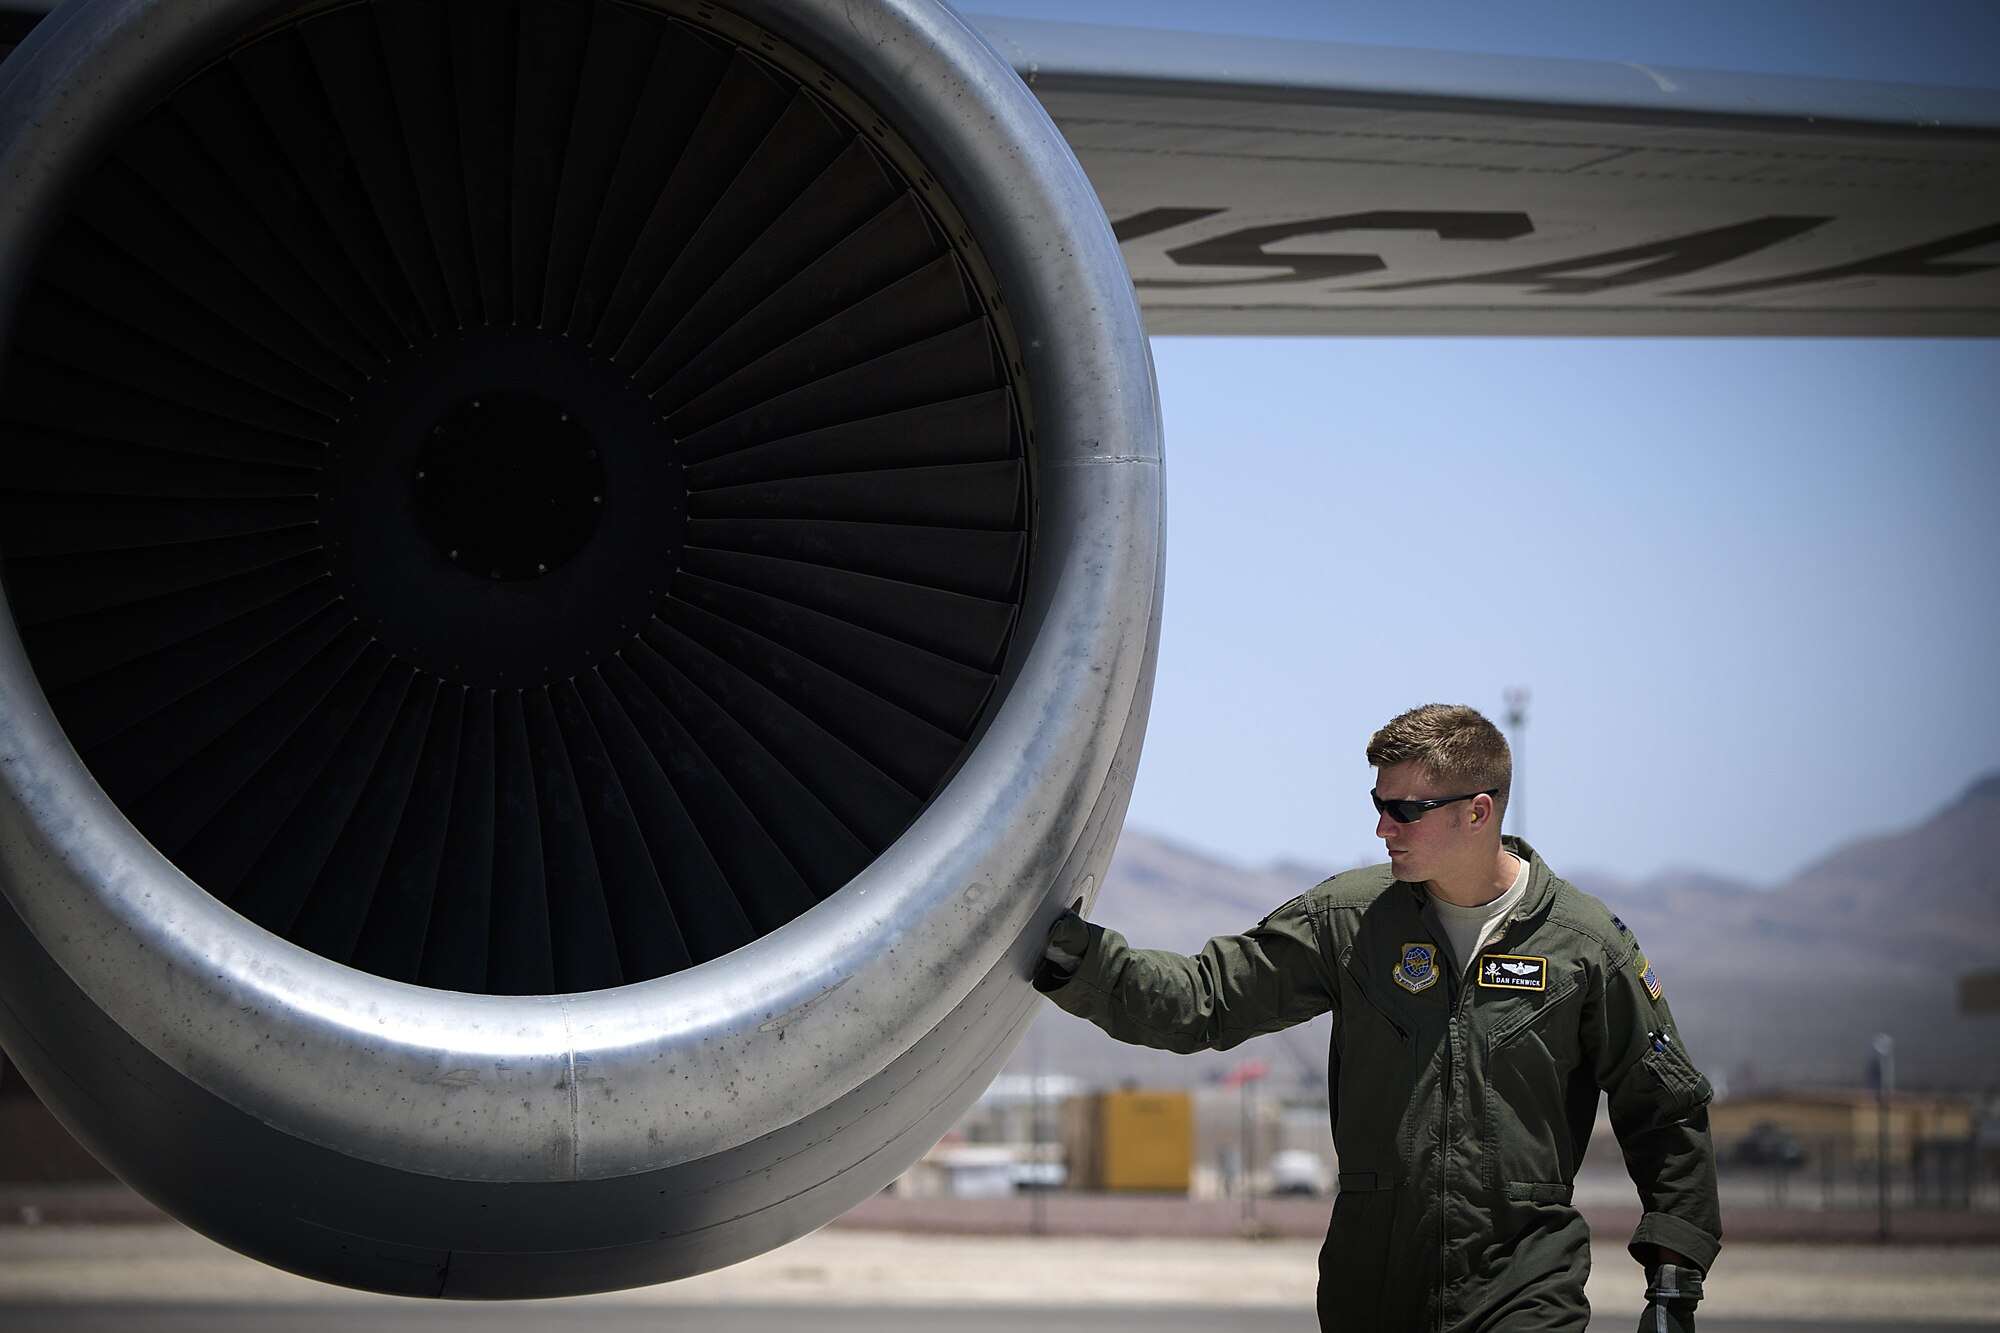 Capt. Dan Fenwick, a KC-135 Stratotanker pilot from MacDill Air Force Base, brushes the outside of an engine during pre-flight checks at Nellis Air Force Base, Nevada July 18, 2015 during exercise Red Flag. Red Flag 16-3 is one of four Red Flag exercises at Nellis--this edition of Red Flag focusing on multi-domain operations in air, space and cyberspace. (U.S. Air Force photo/Tech. Sgt. David Salanitri)